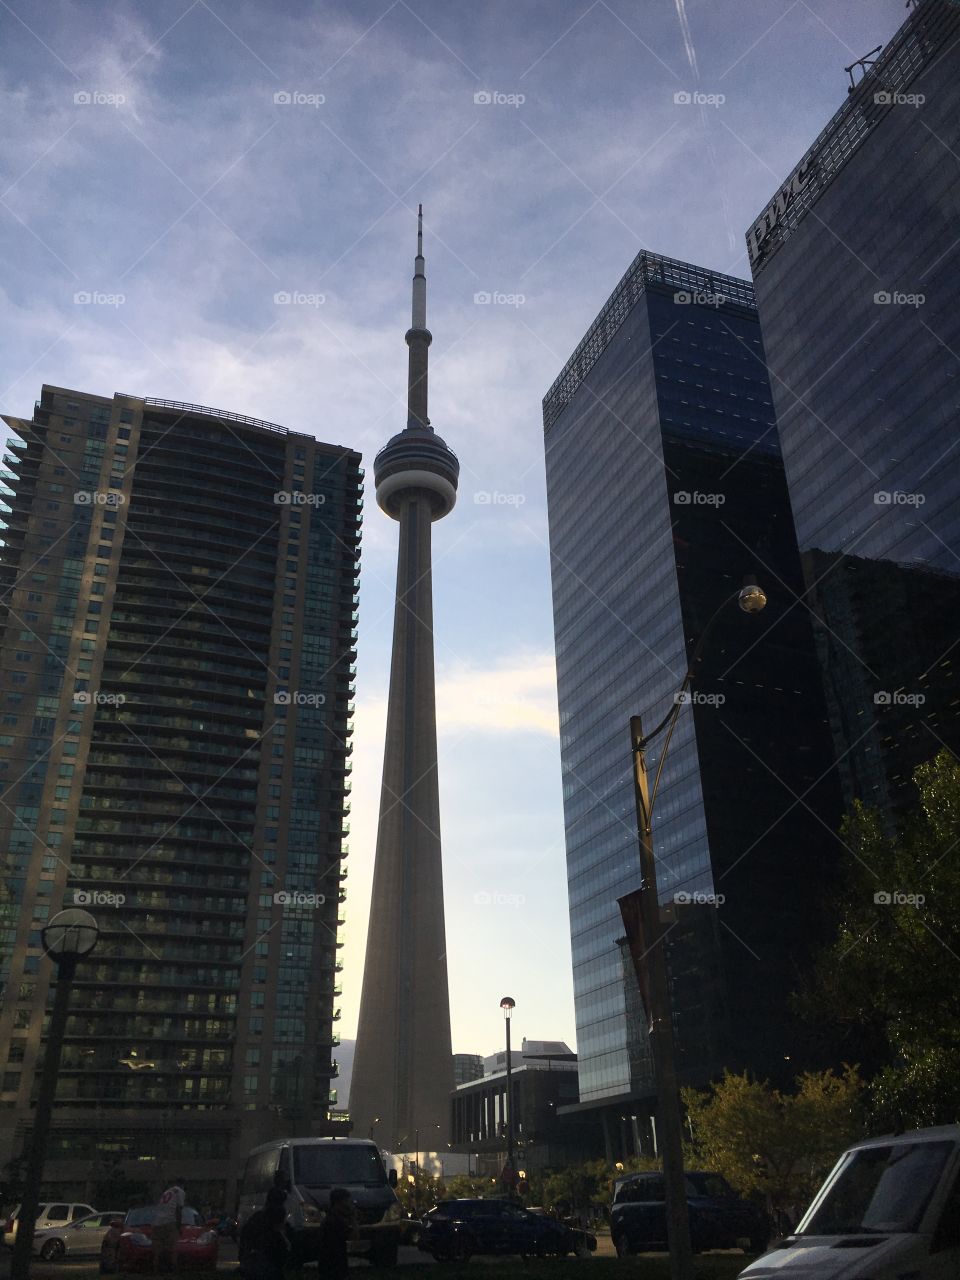 The Toronto tower between two skyscrapers 